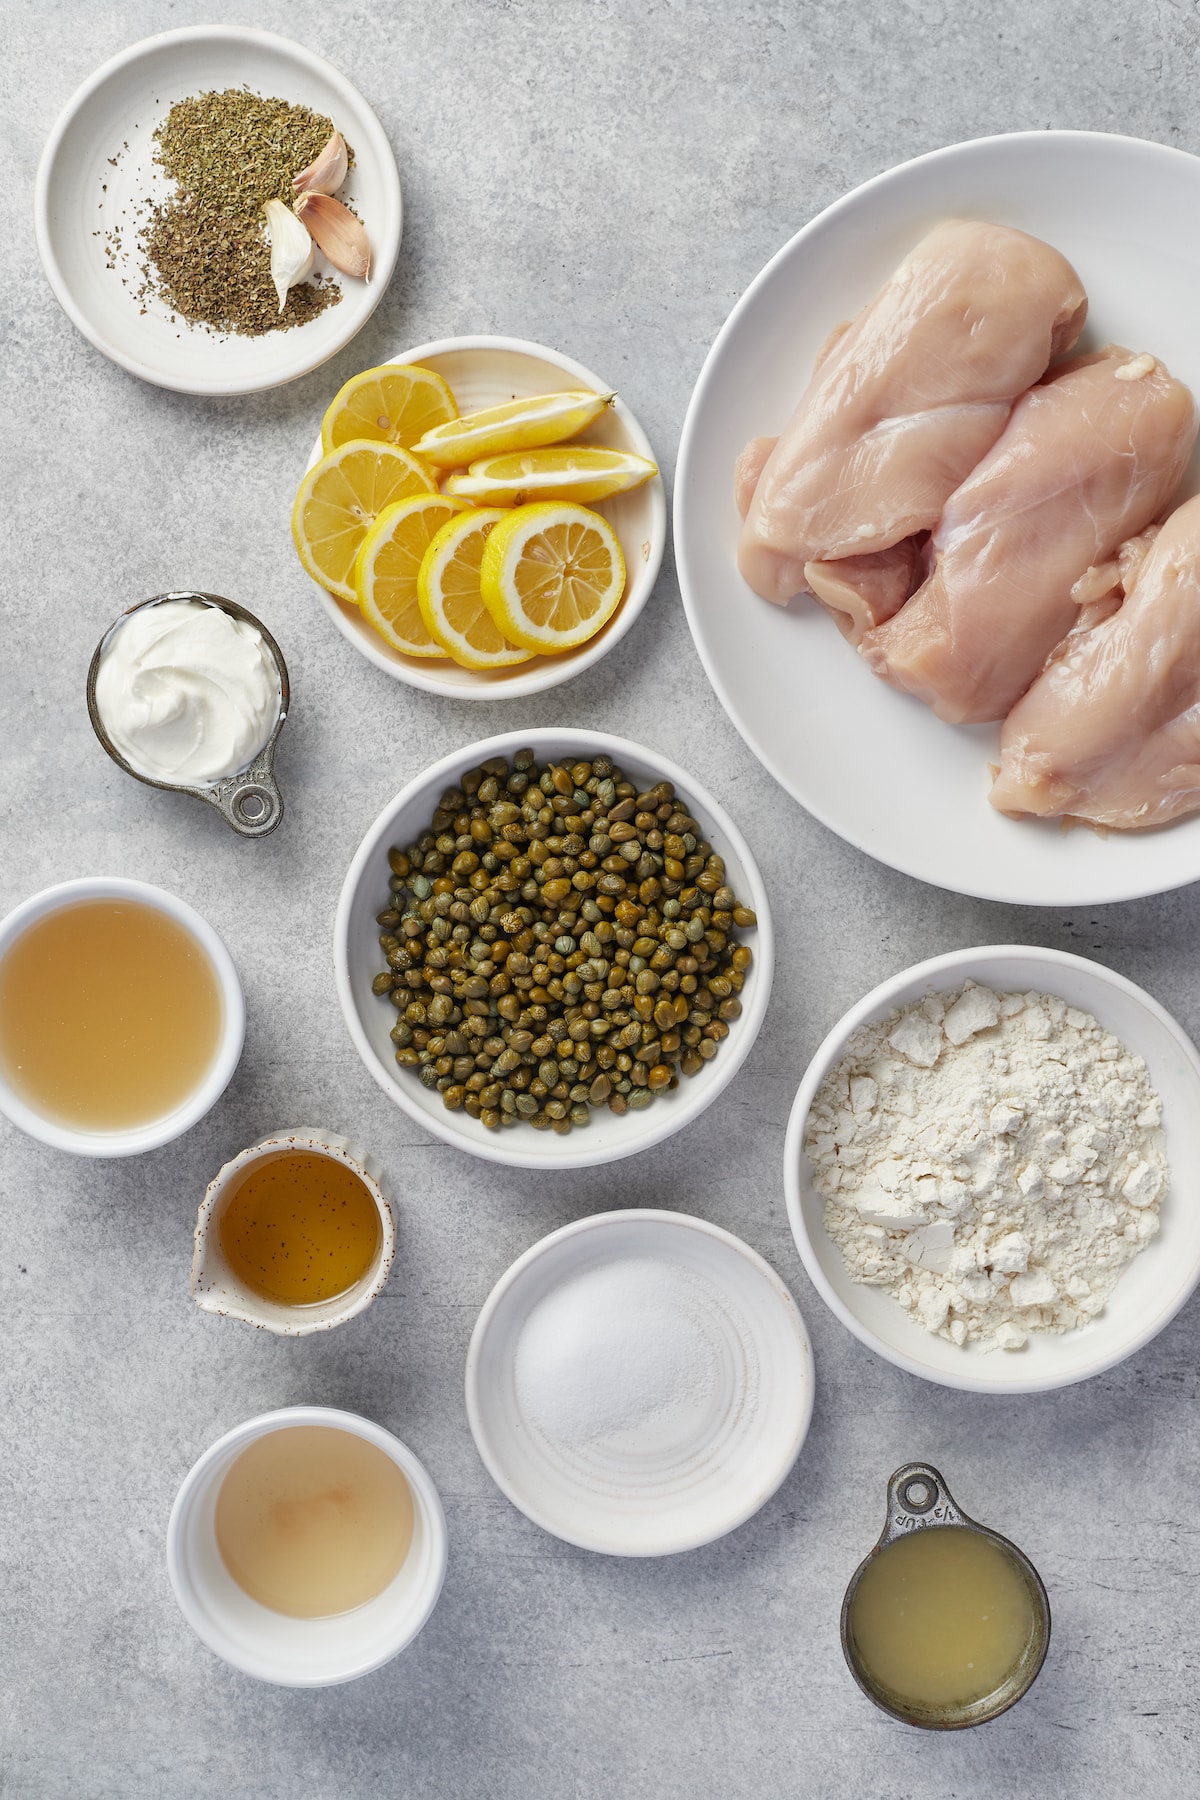 The ingredients for homemade chicken piccata.